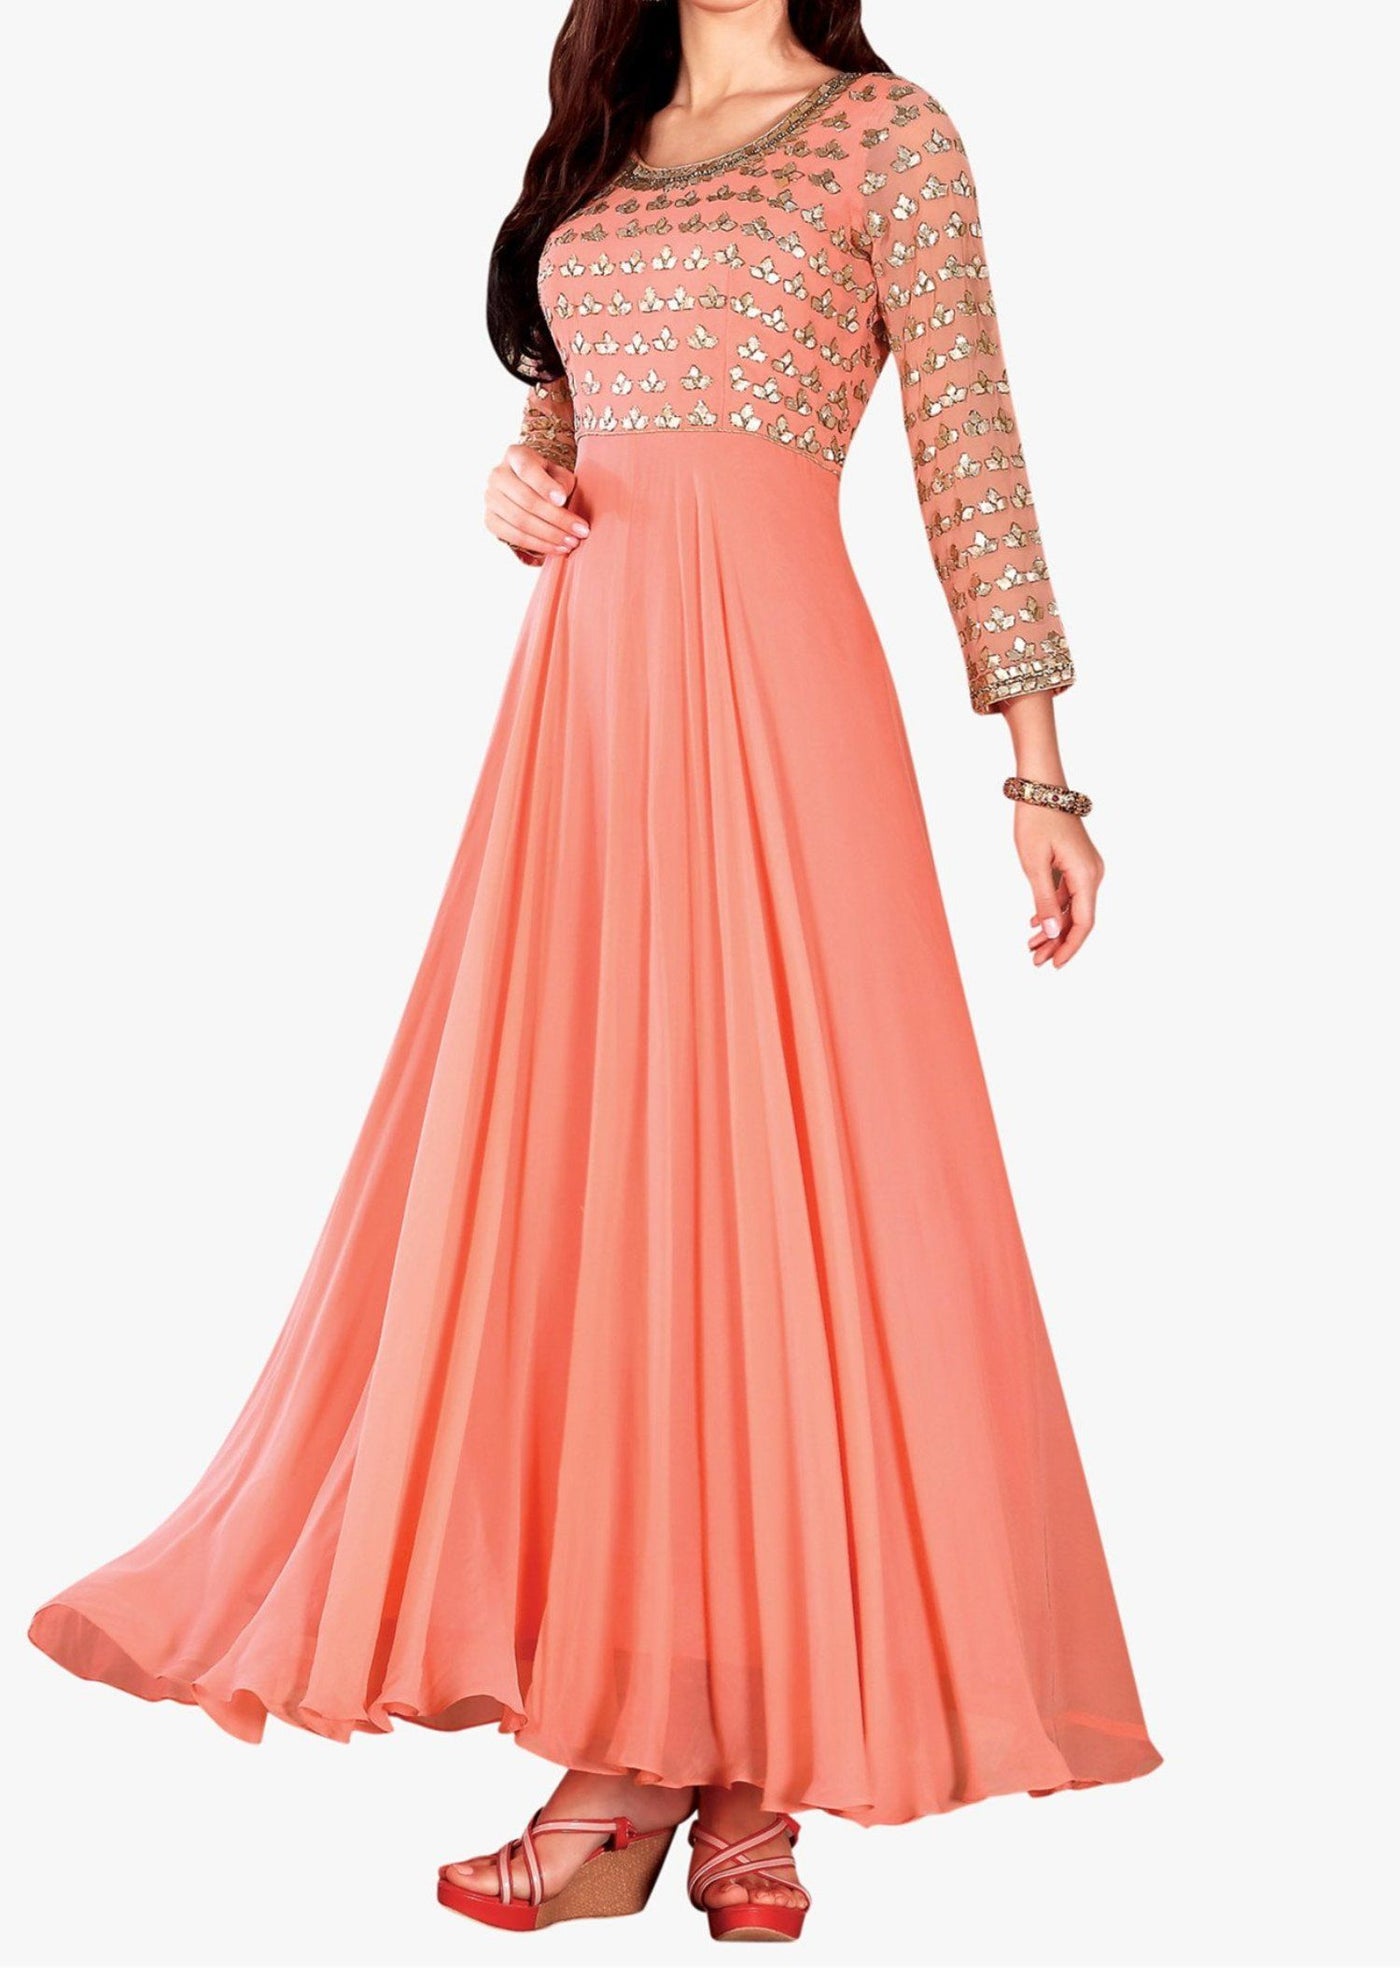 Coral anarkali suit - Indian Clothing in Denver, CO, Aurora, CO, Boulder, CO, Fort Collins, CO, Colorado Springs, CO, Parker, CO, Highlands Ranch, CO, Cherry Creek, CO, Centennial, CO, and Longmont, CO. Nationwide shipping USA - India Fashion X